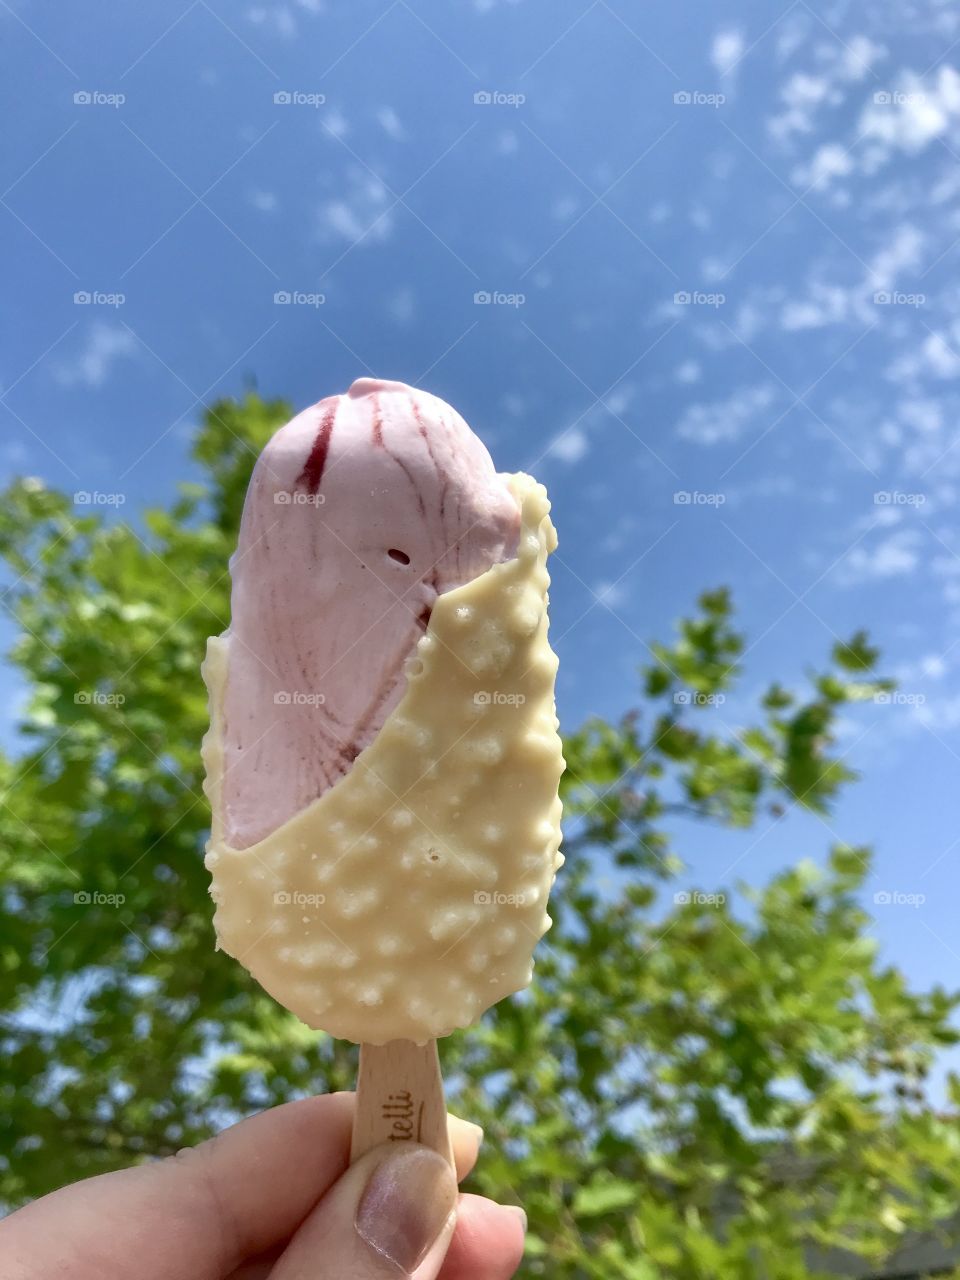 What a better way to describe a summer mood than ice cream on a hot day like this.